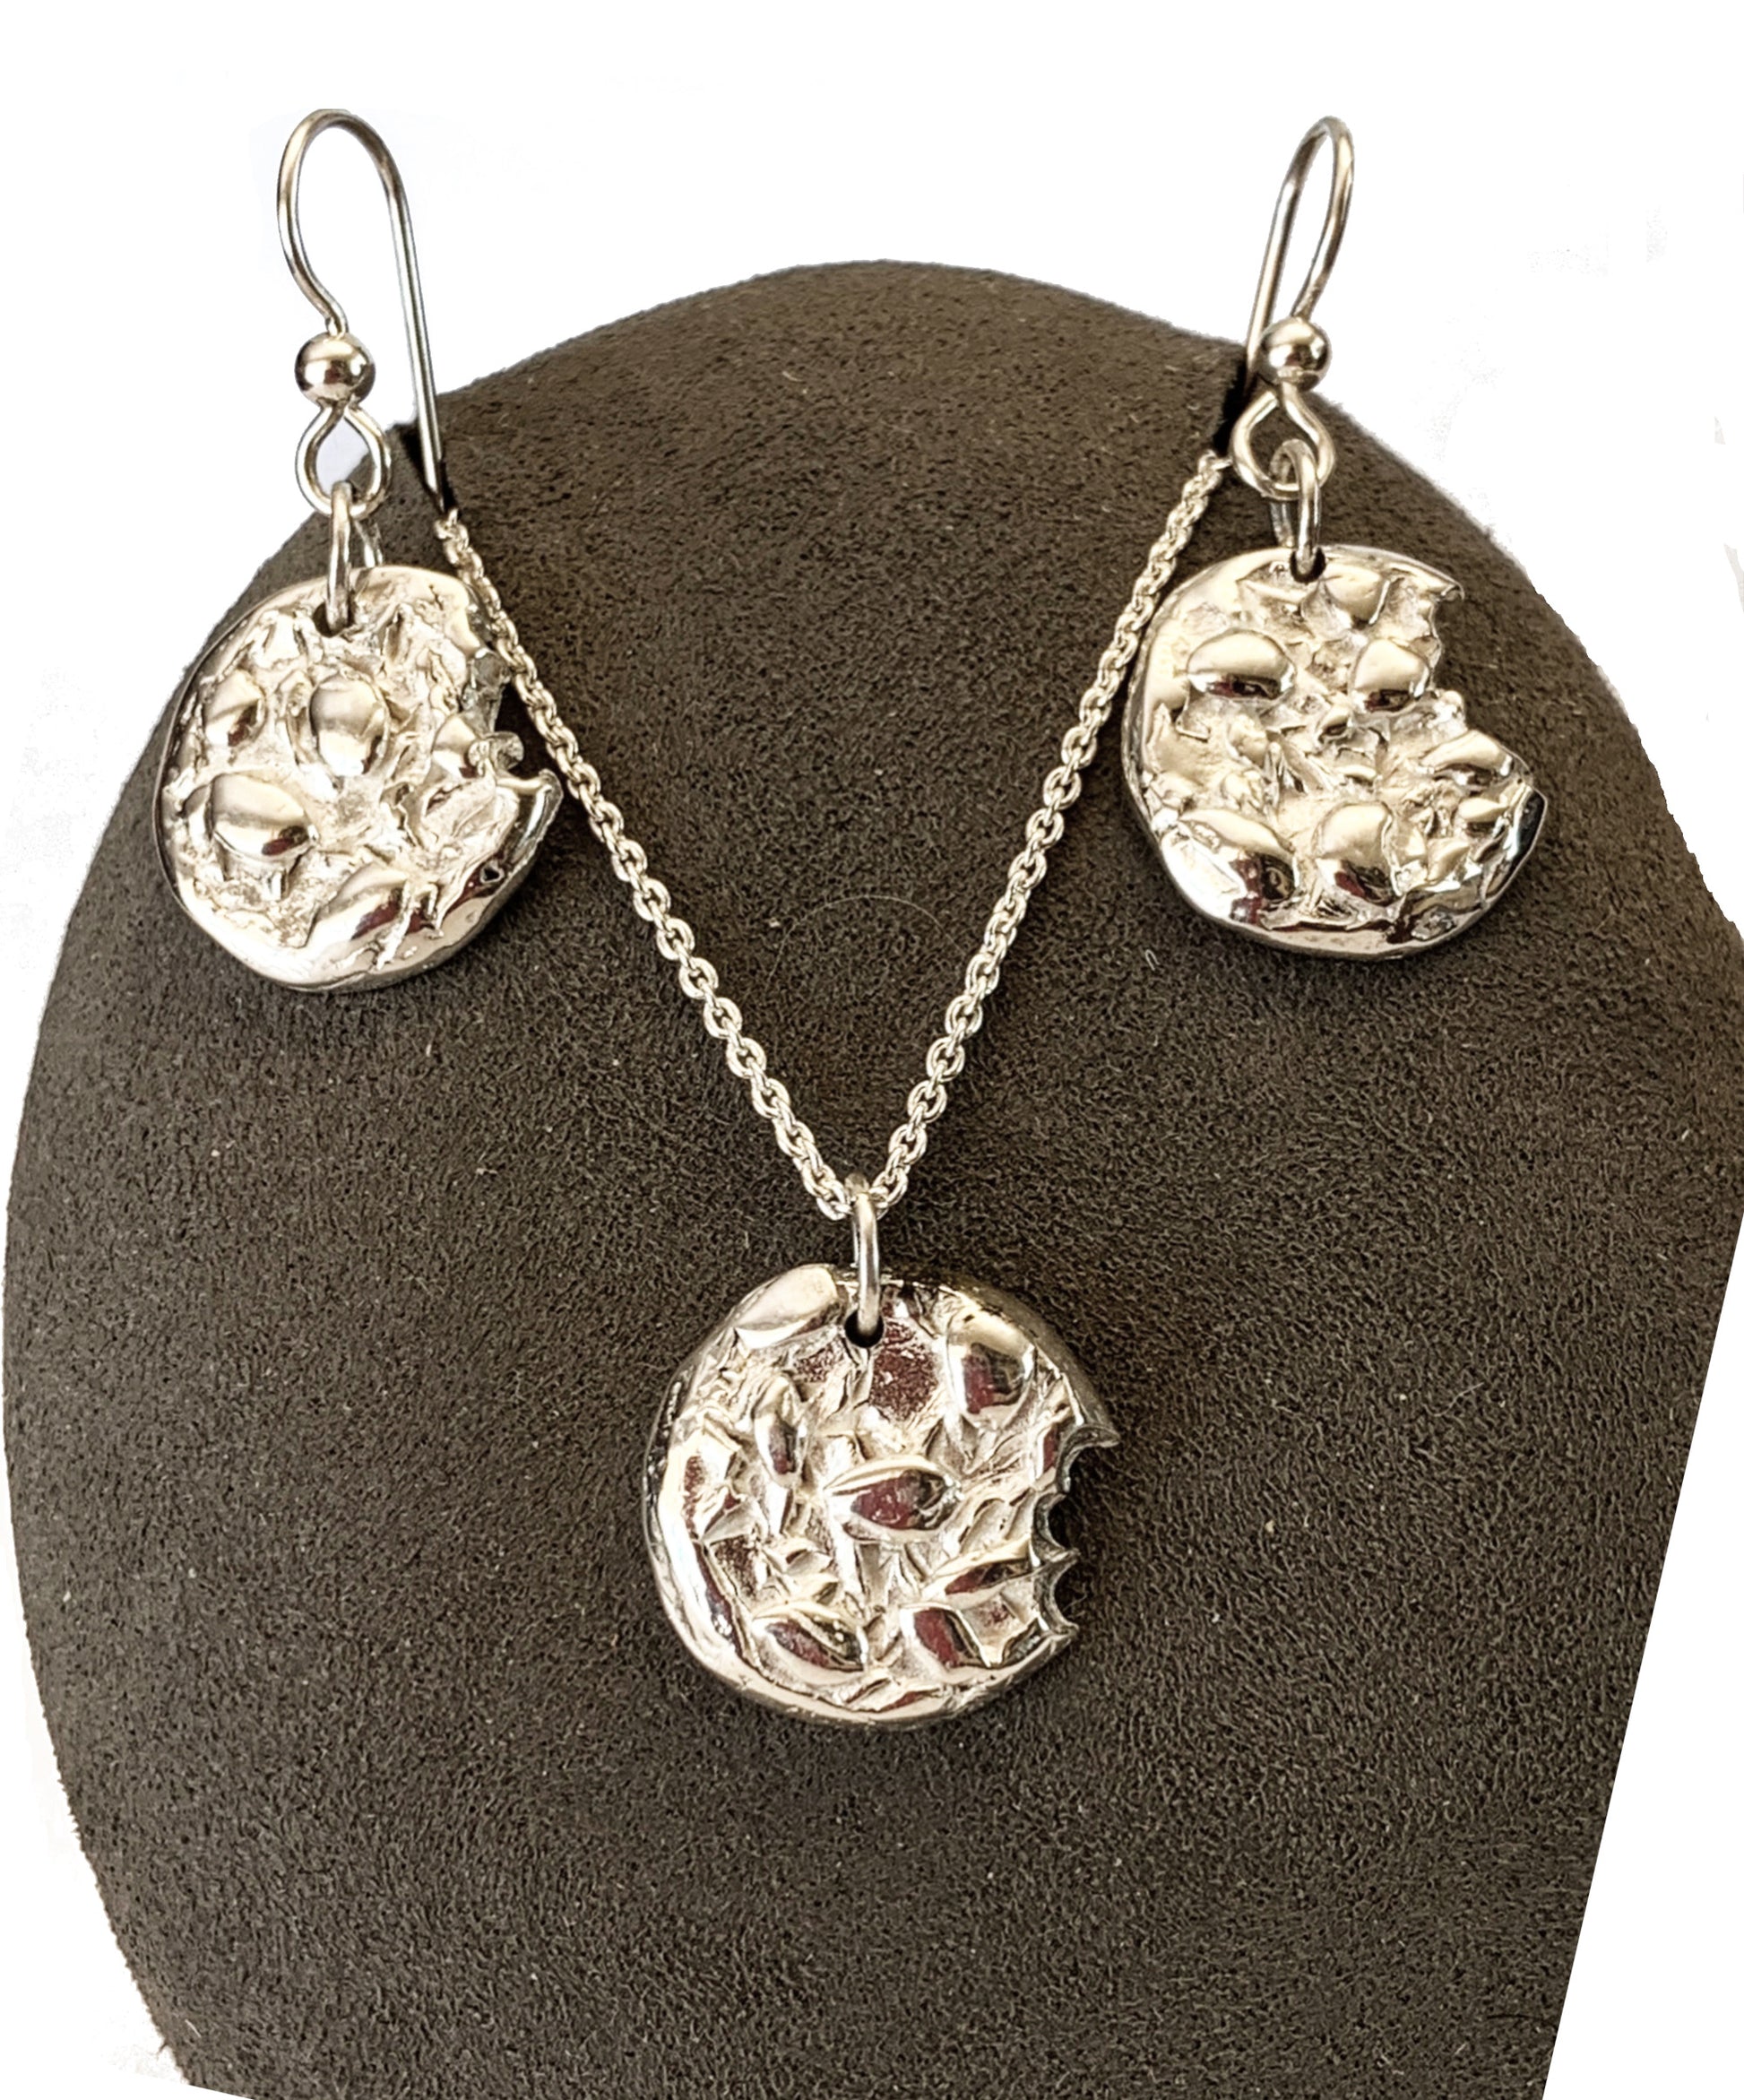 sterling silver oatmeal cookie earring and necklace set